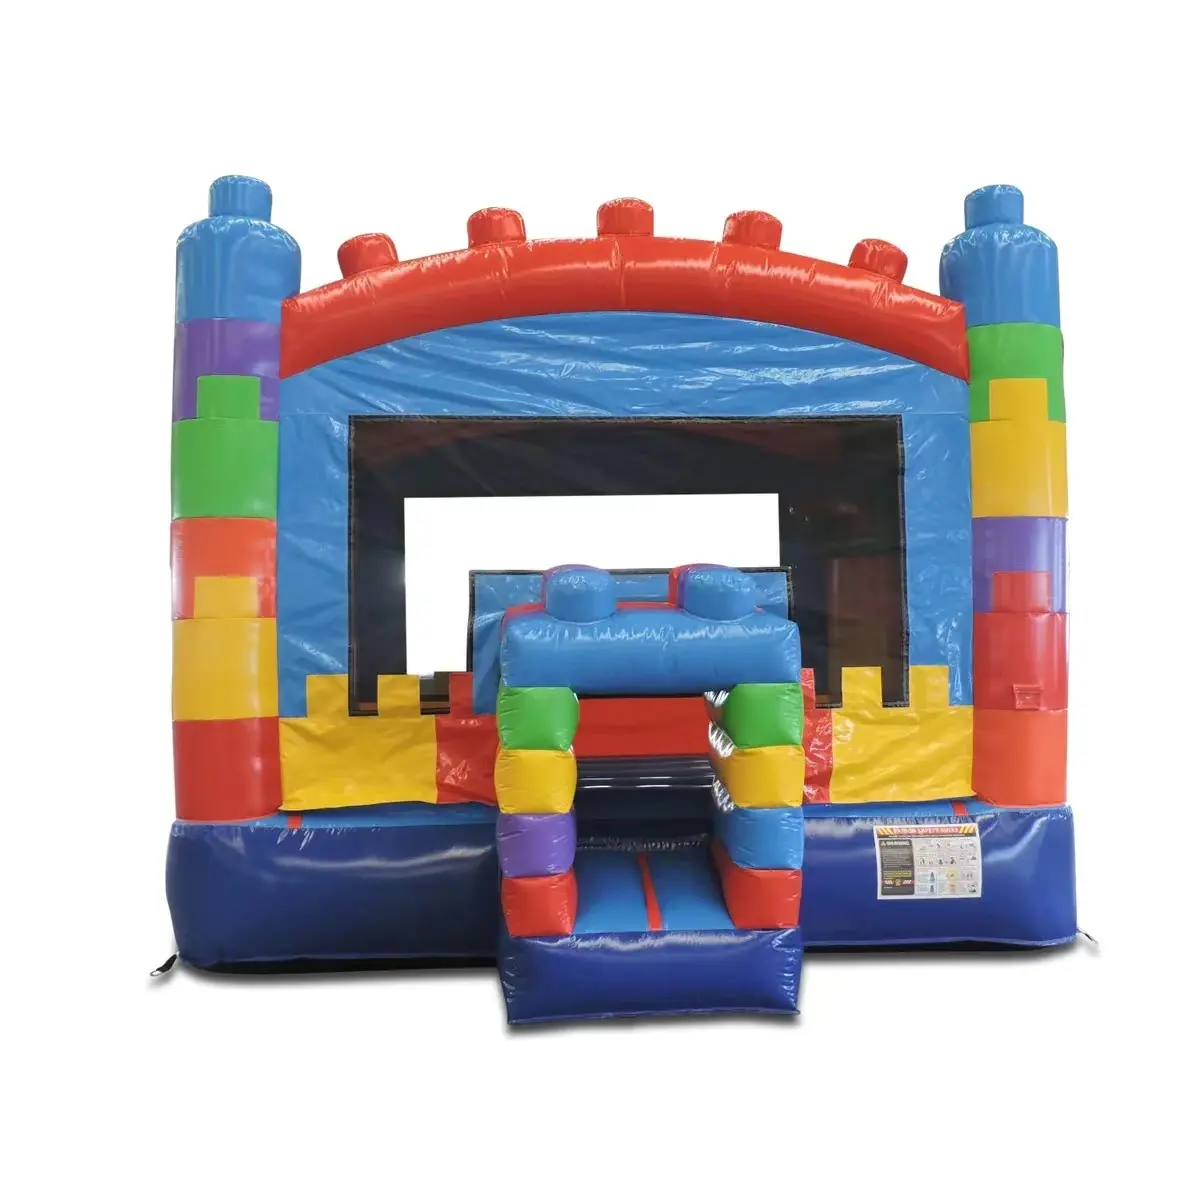 Hot Bounce House  Commerical Bounce House Kids Bouncer Bounce House For Sale With Repair Kits